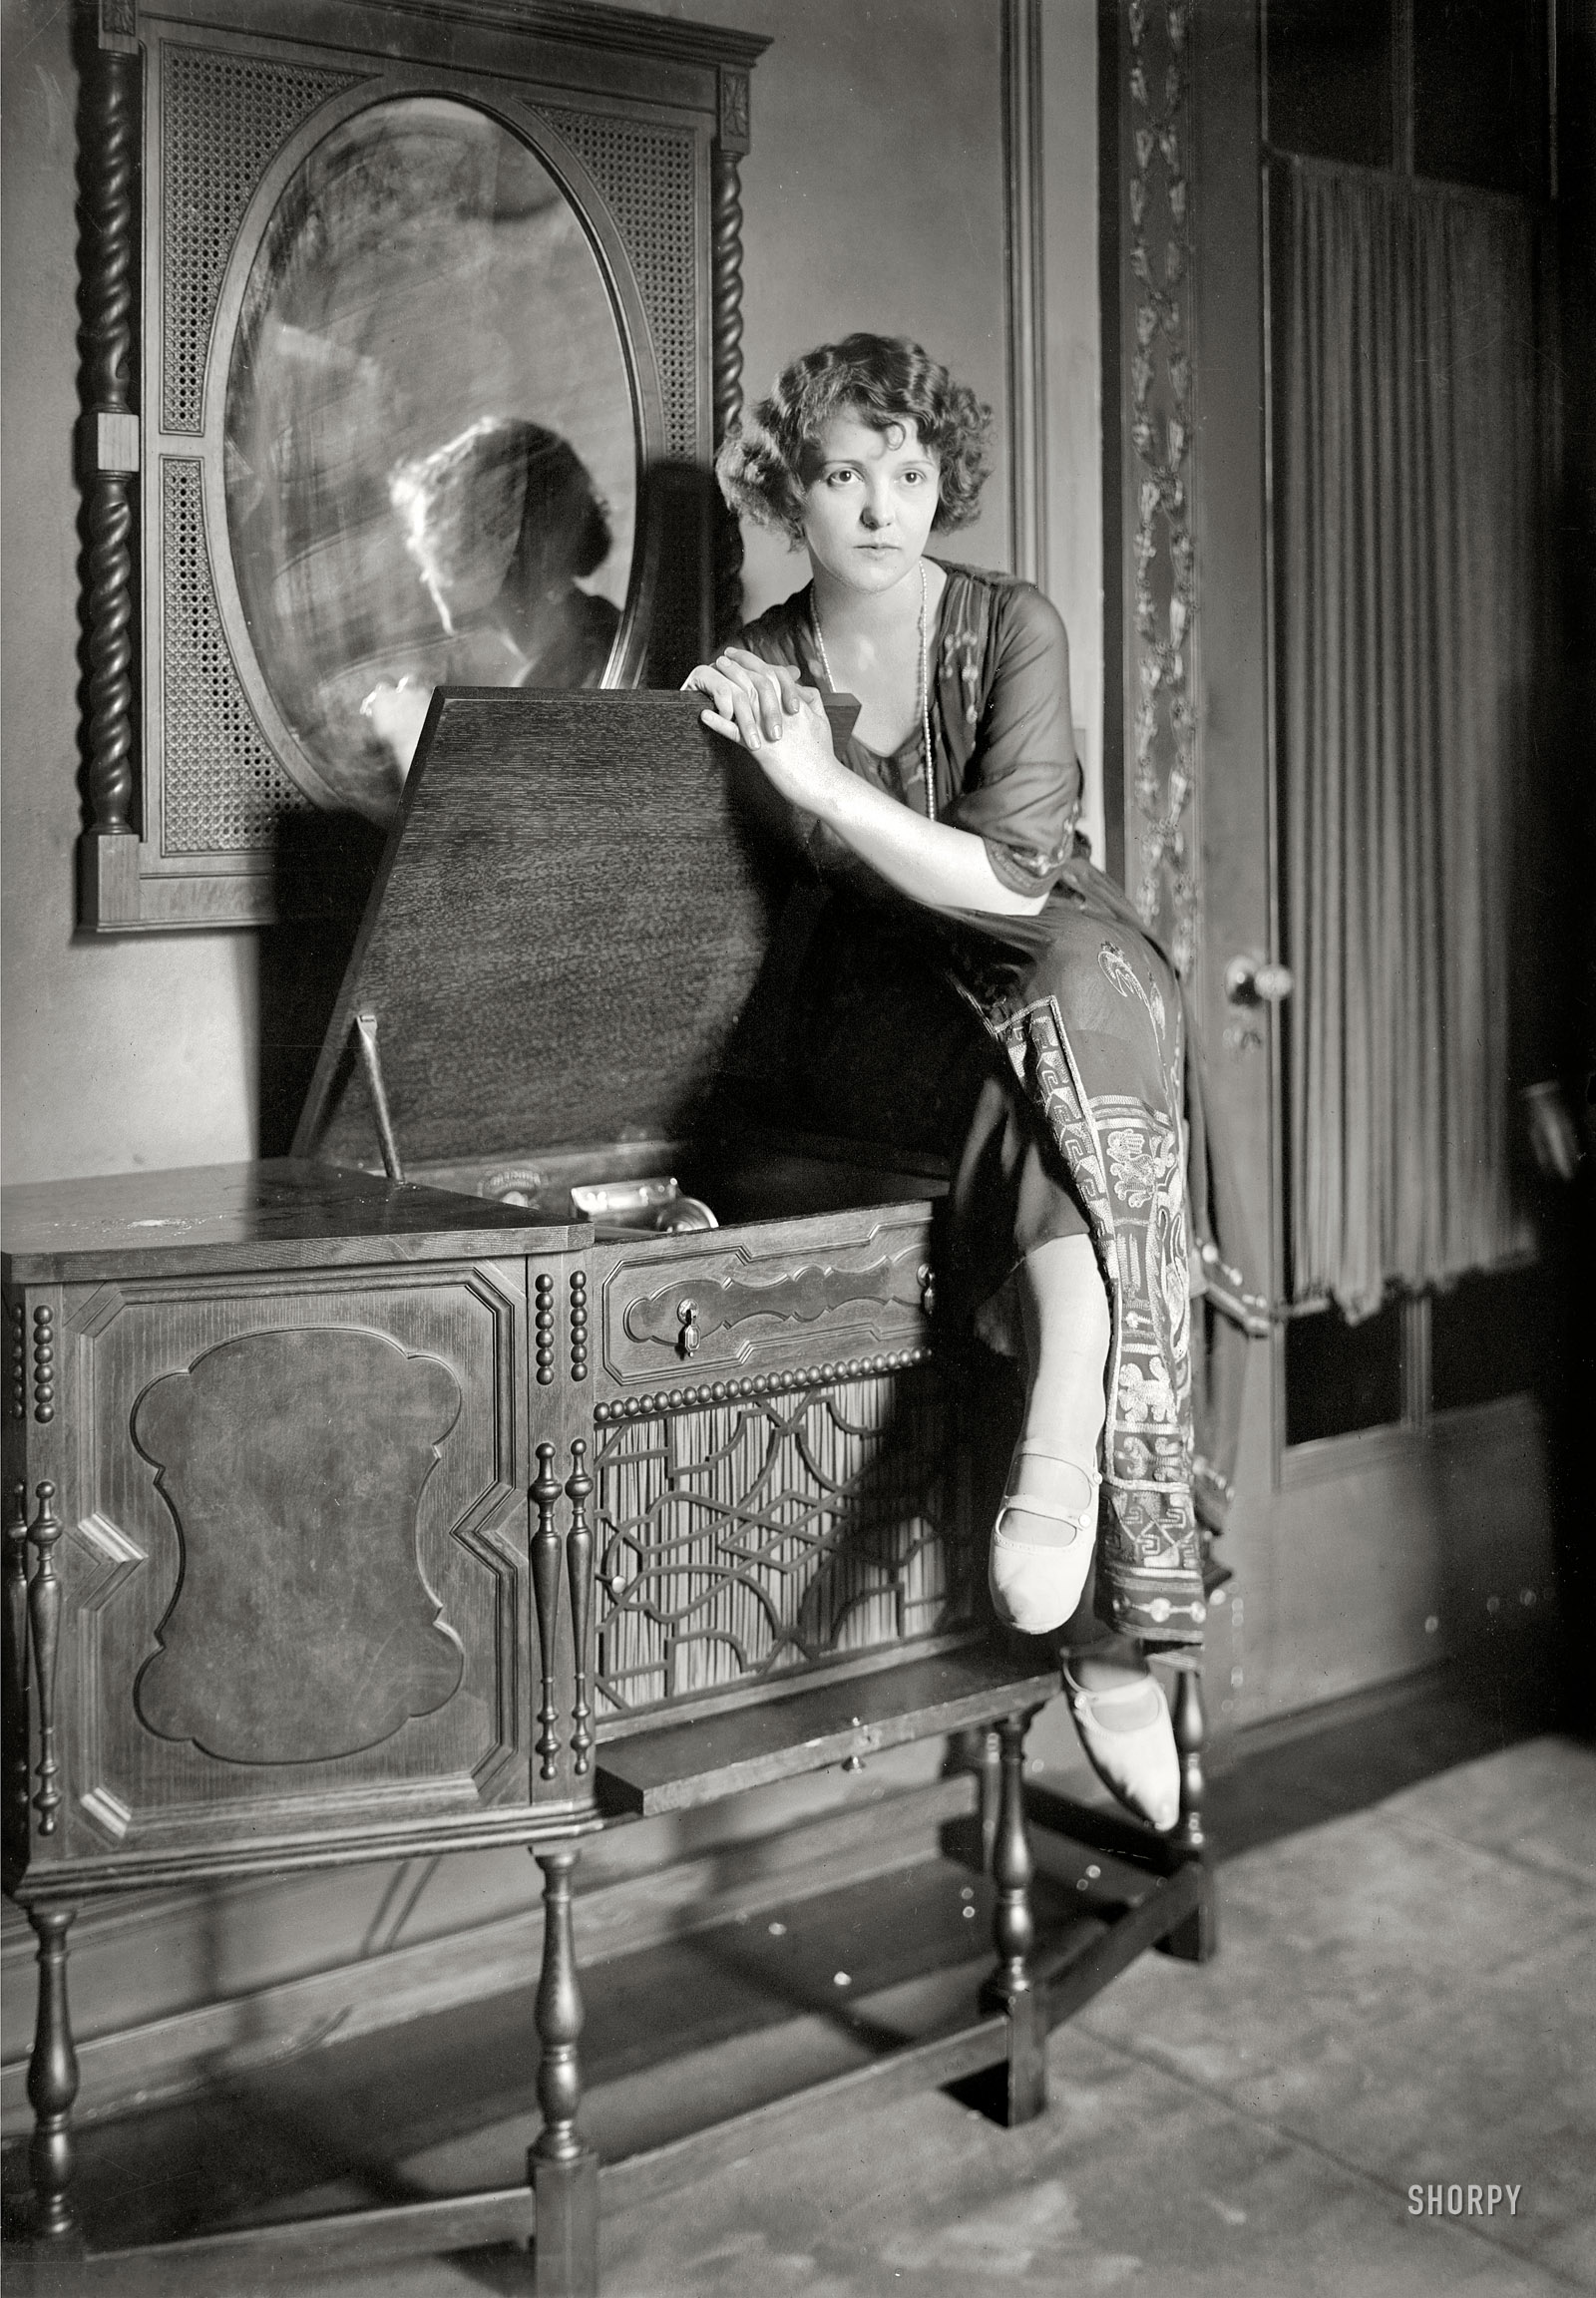 New York circa 1921. A lady and her phonograph. The name looks like Farnum or Farmer. 5x7 glass negative, George Grantham Bain Collection. View full size.